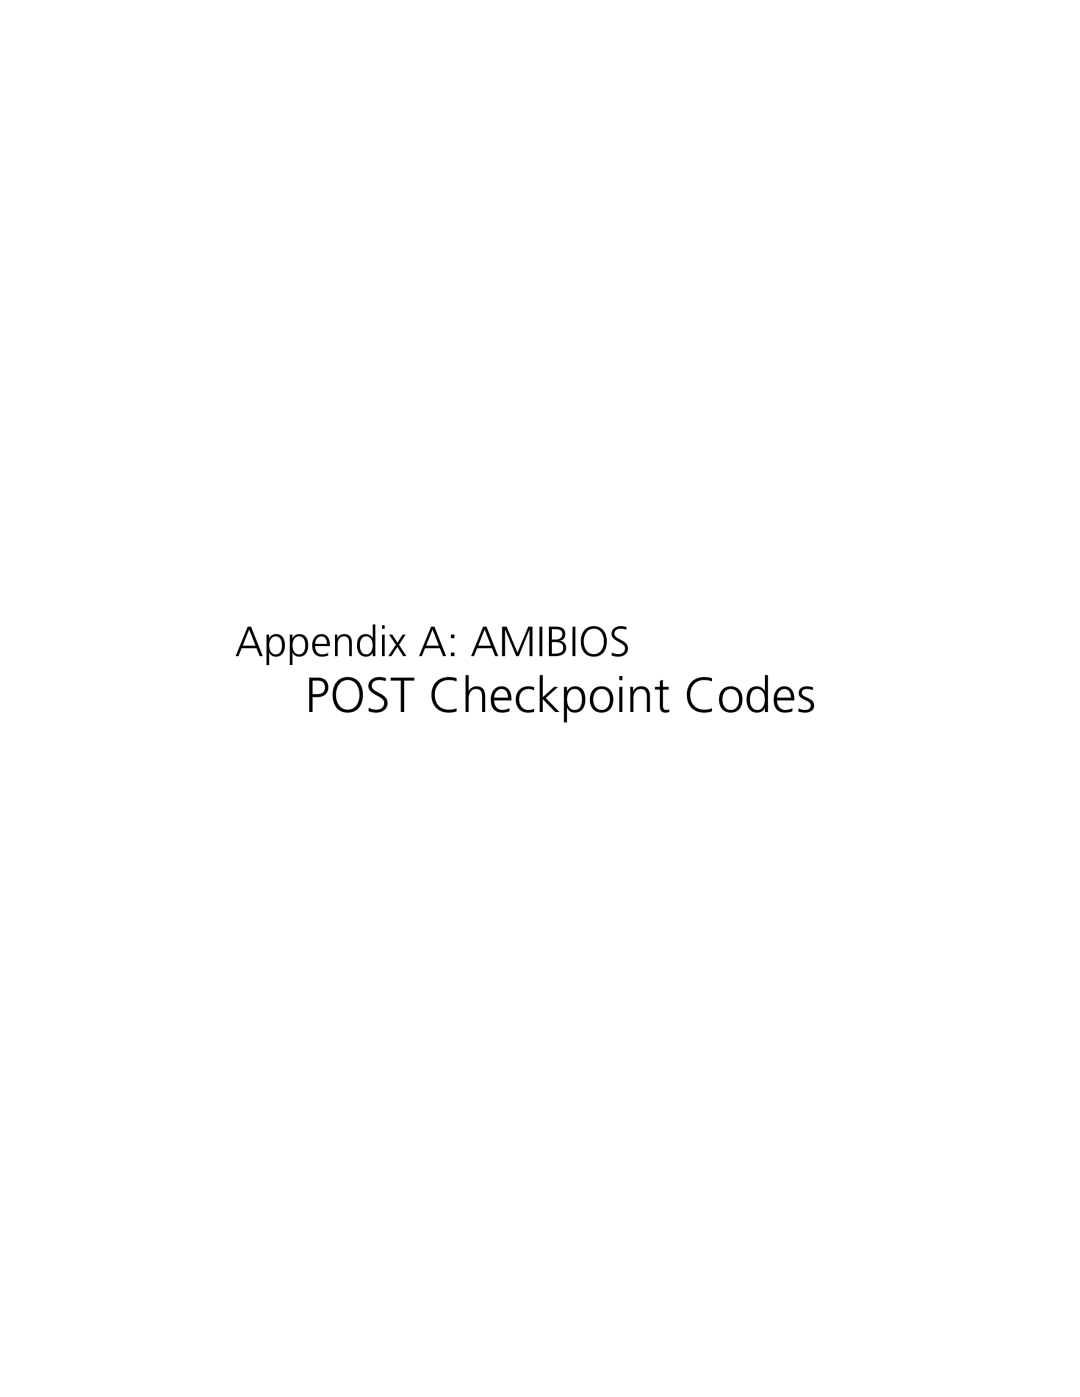 Acer G301 manual POST Checkpoint Codes, Appendix A AMIBIOS 